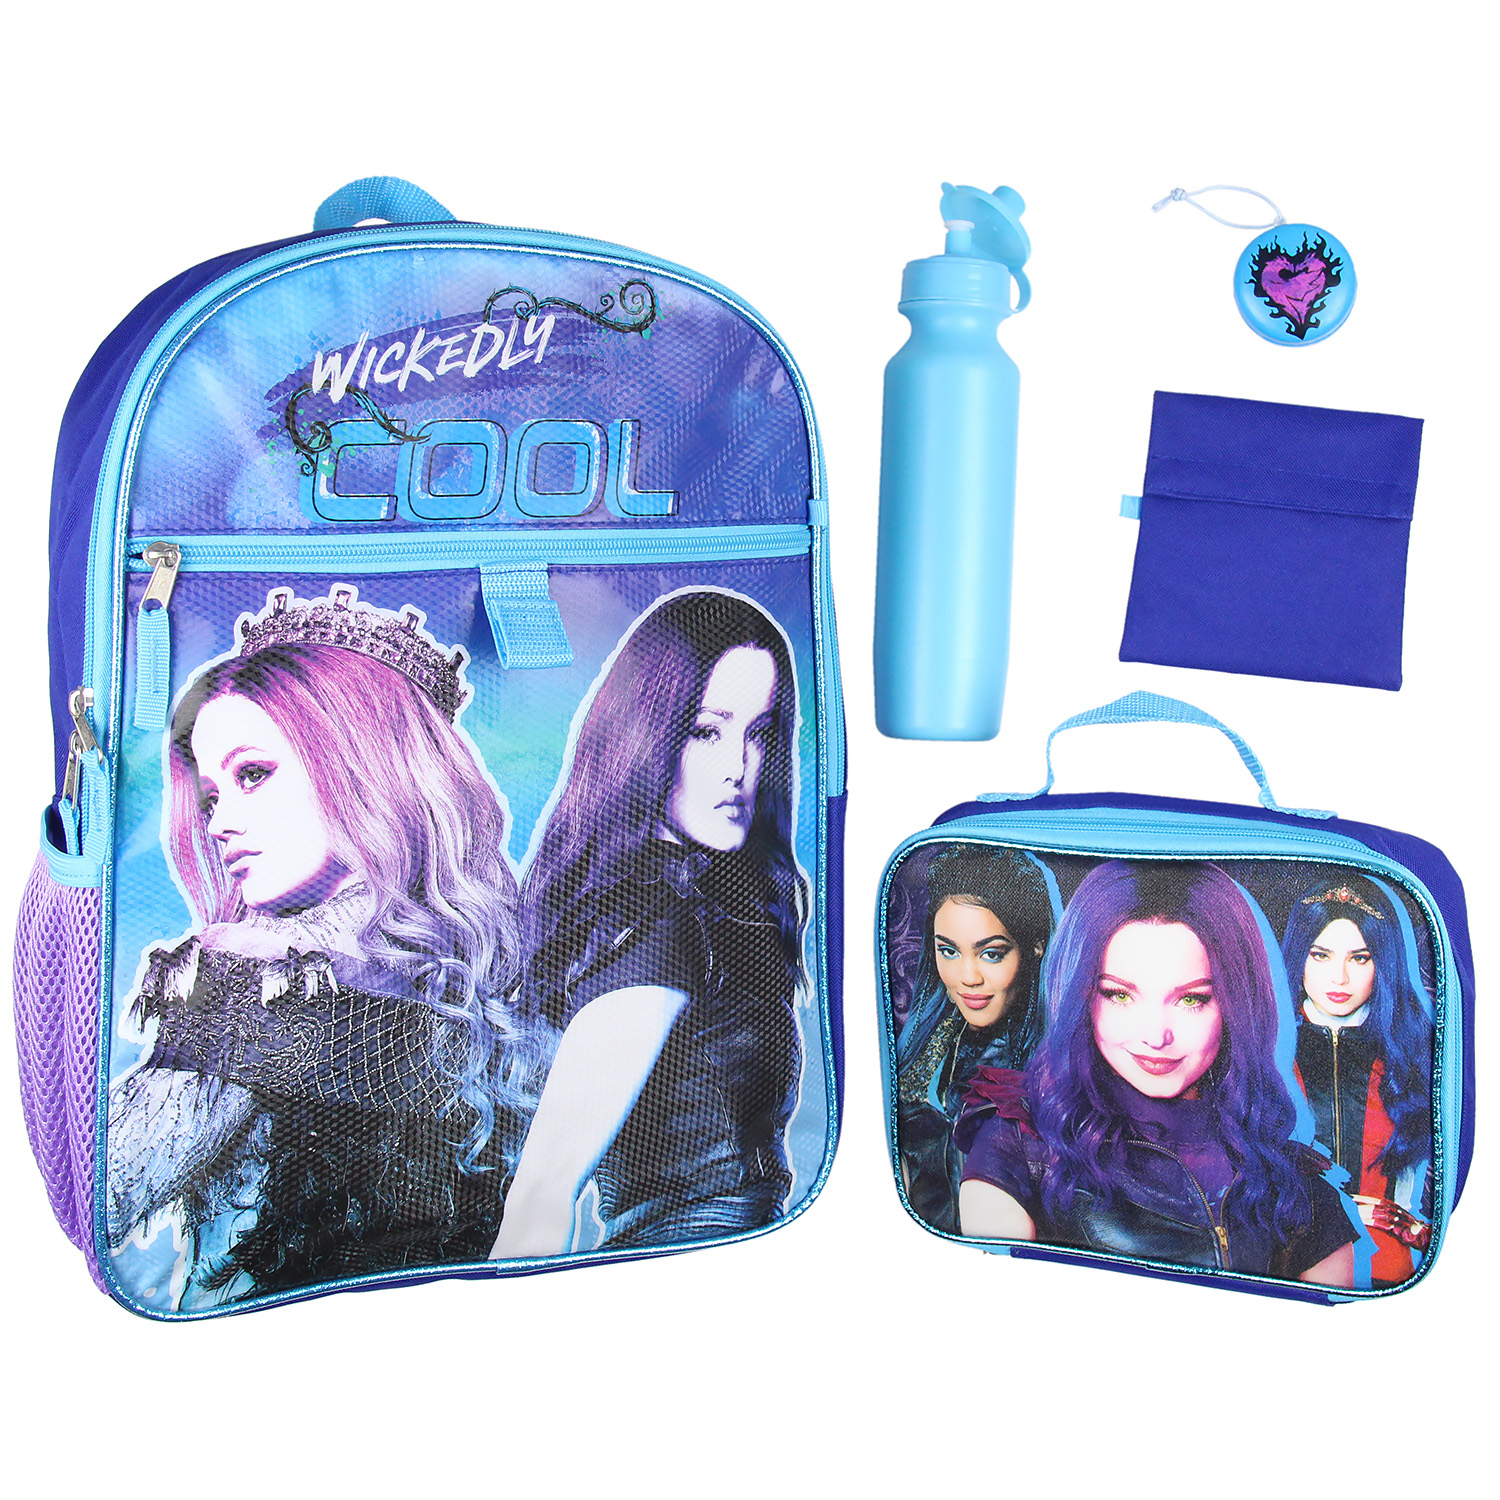 Bioworld Disney Descendants Wickedly Cool 16" Backpack Lunch Tote Water Bottle Squishy Snack Tote 5 Pc Set